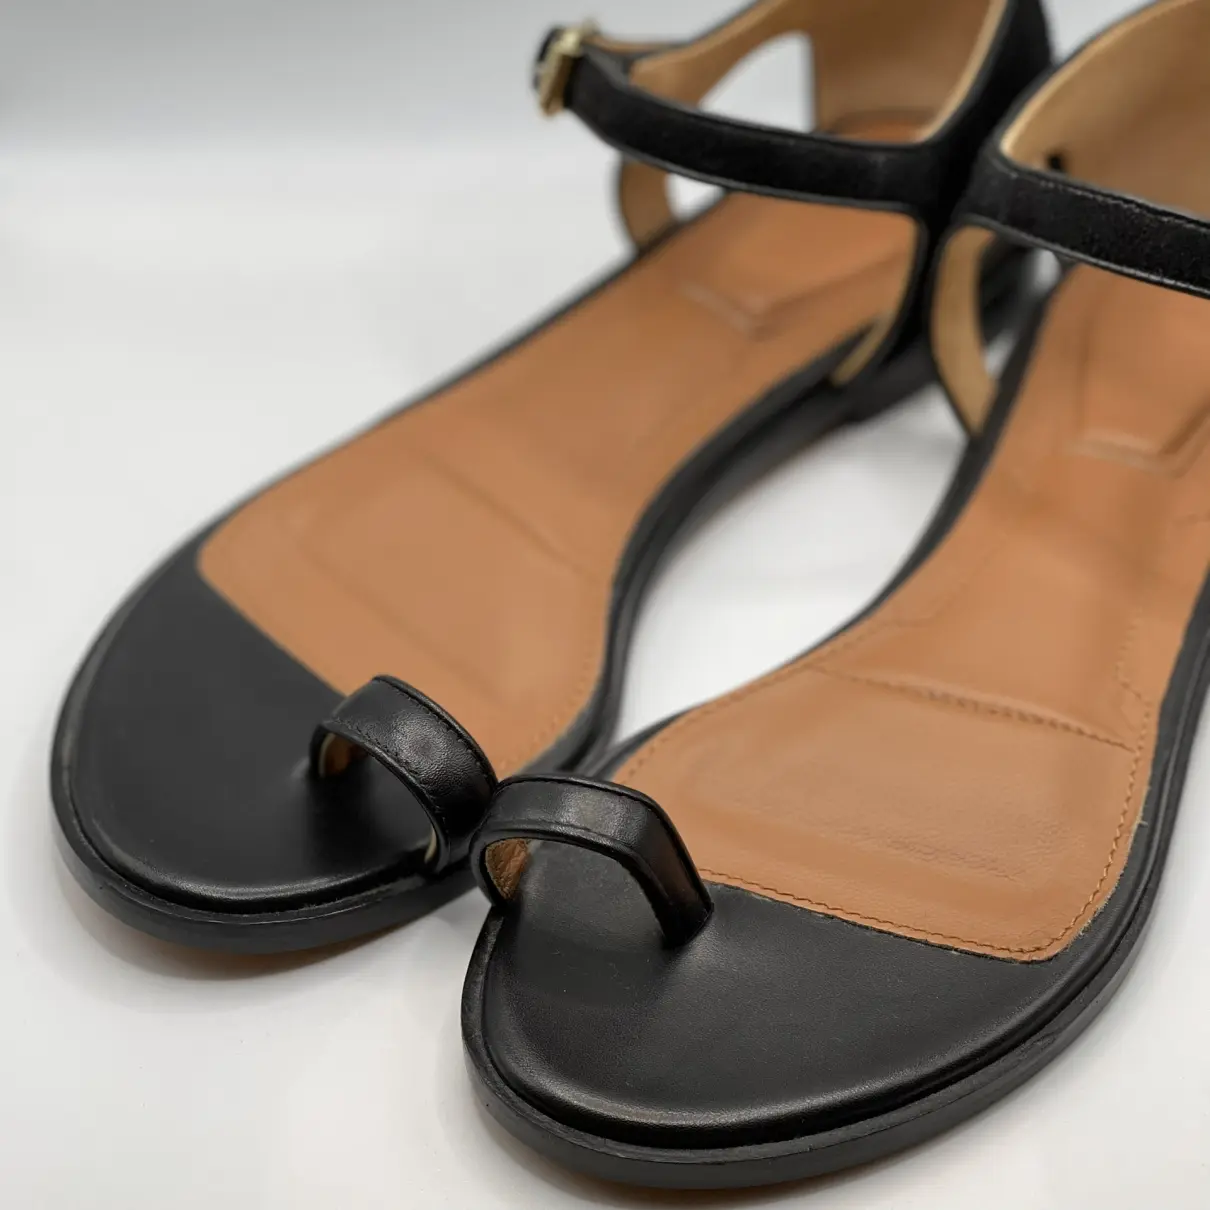 Buy Givenchy Leather sandal online